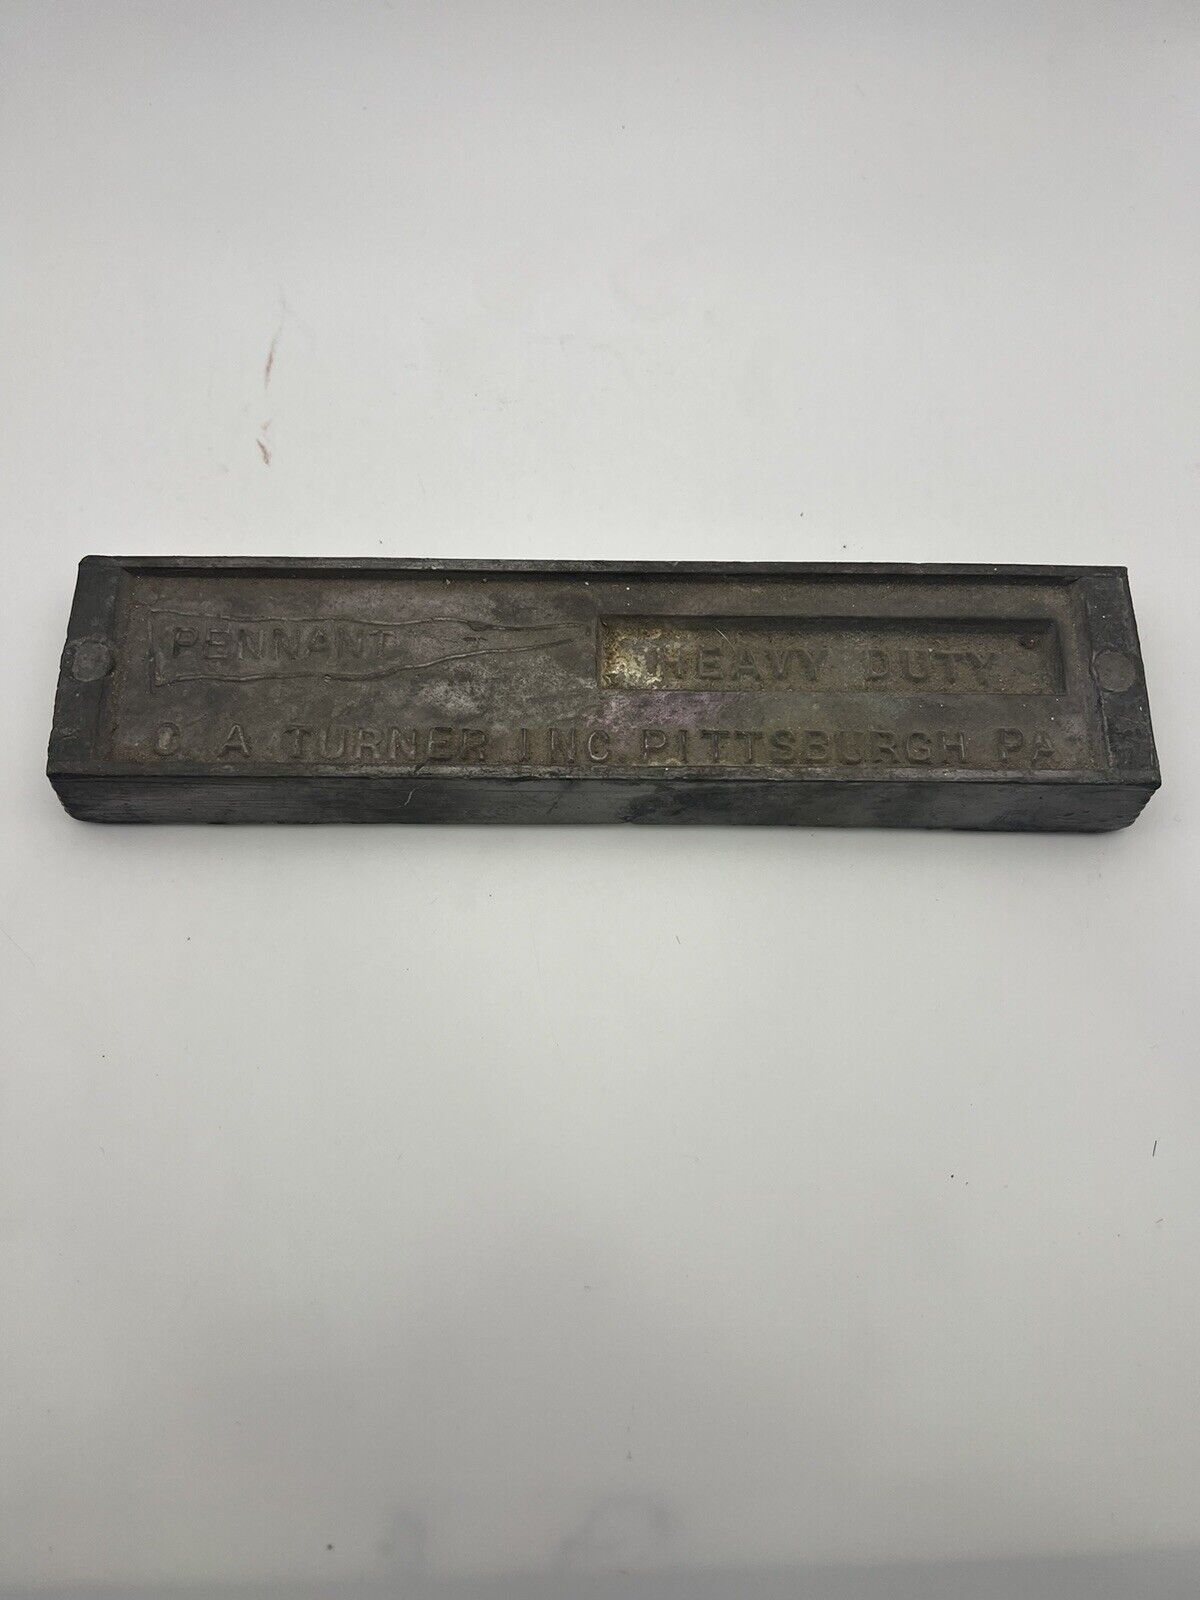 Vintage Lead Bar Paperweight C.A. Turner Inc. Pittsburgh PA 